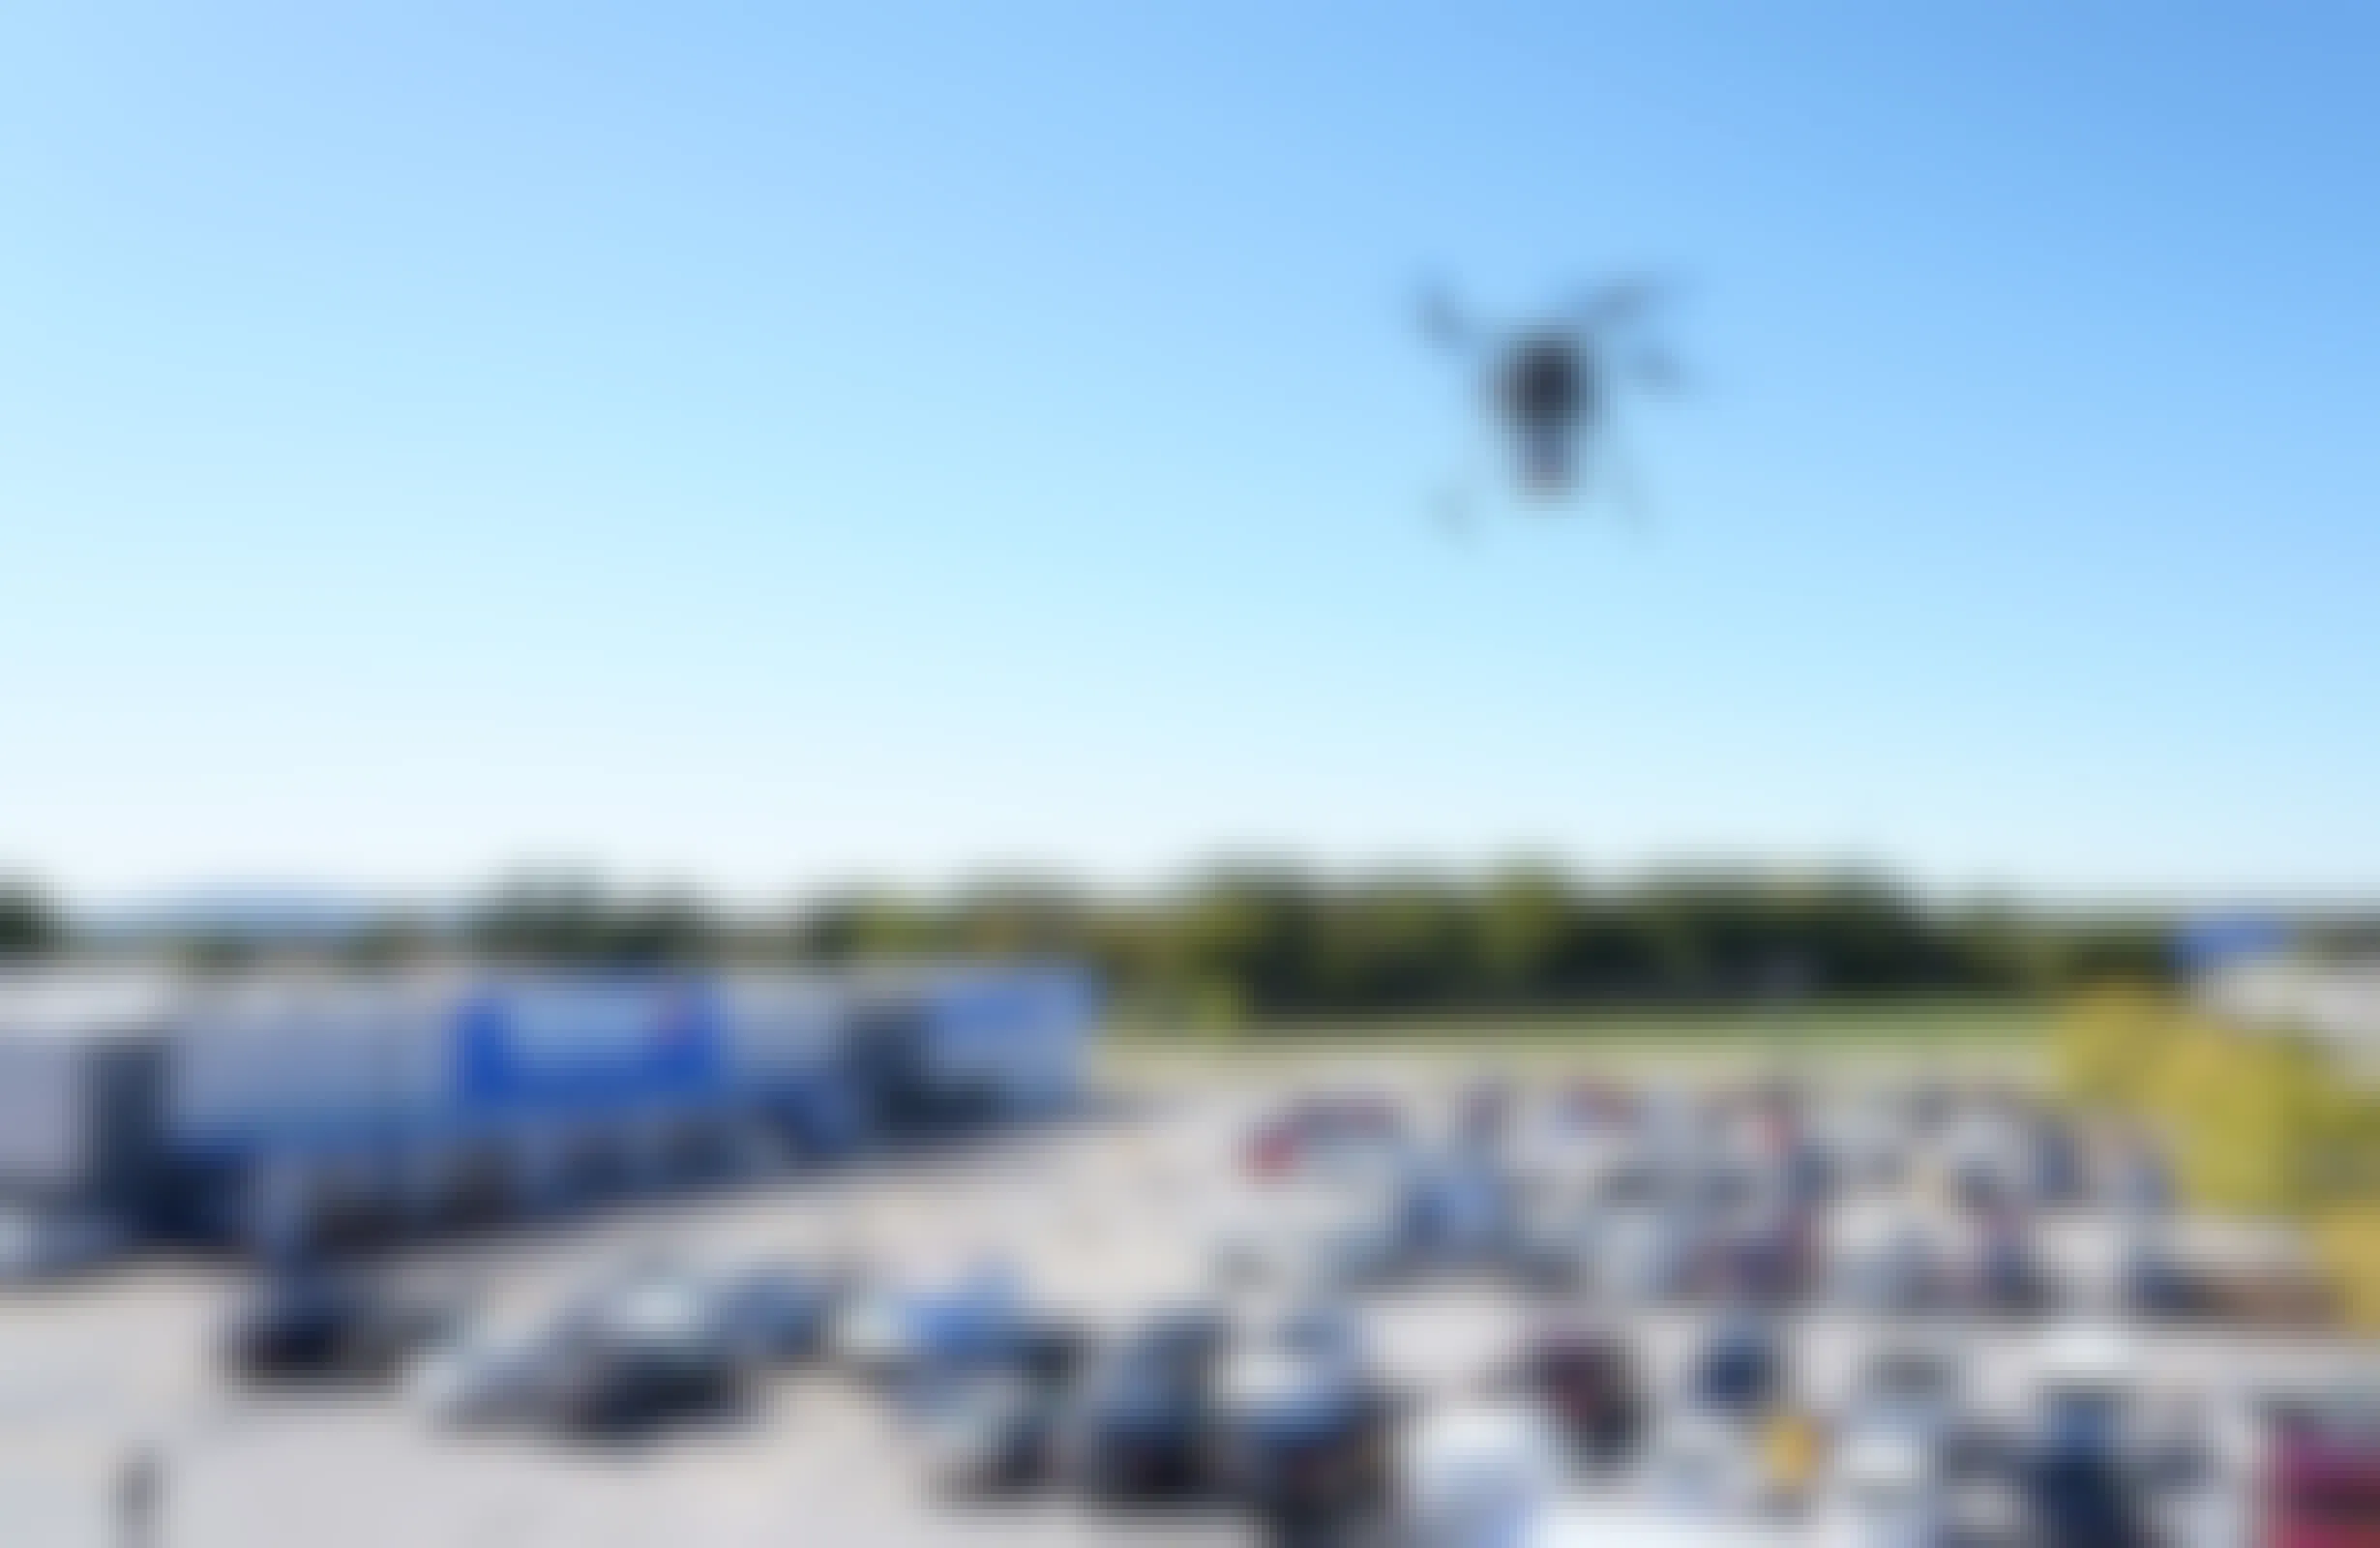 A drone carrying a Walmart delivery box in the sky above a Walmart.